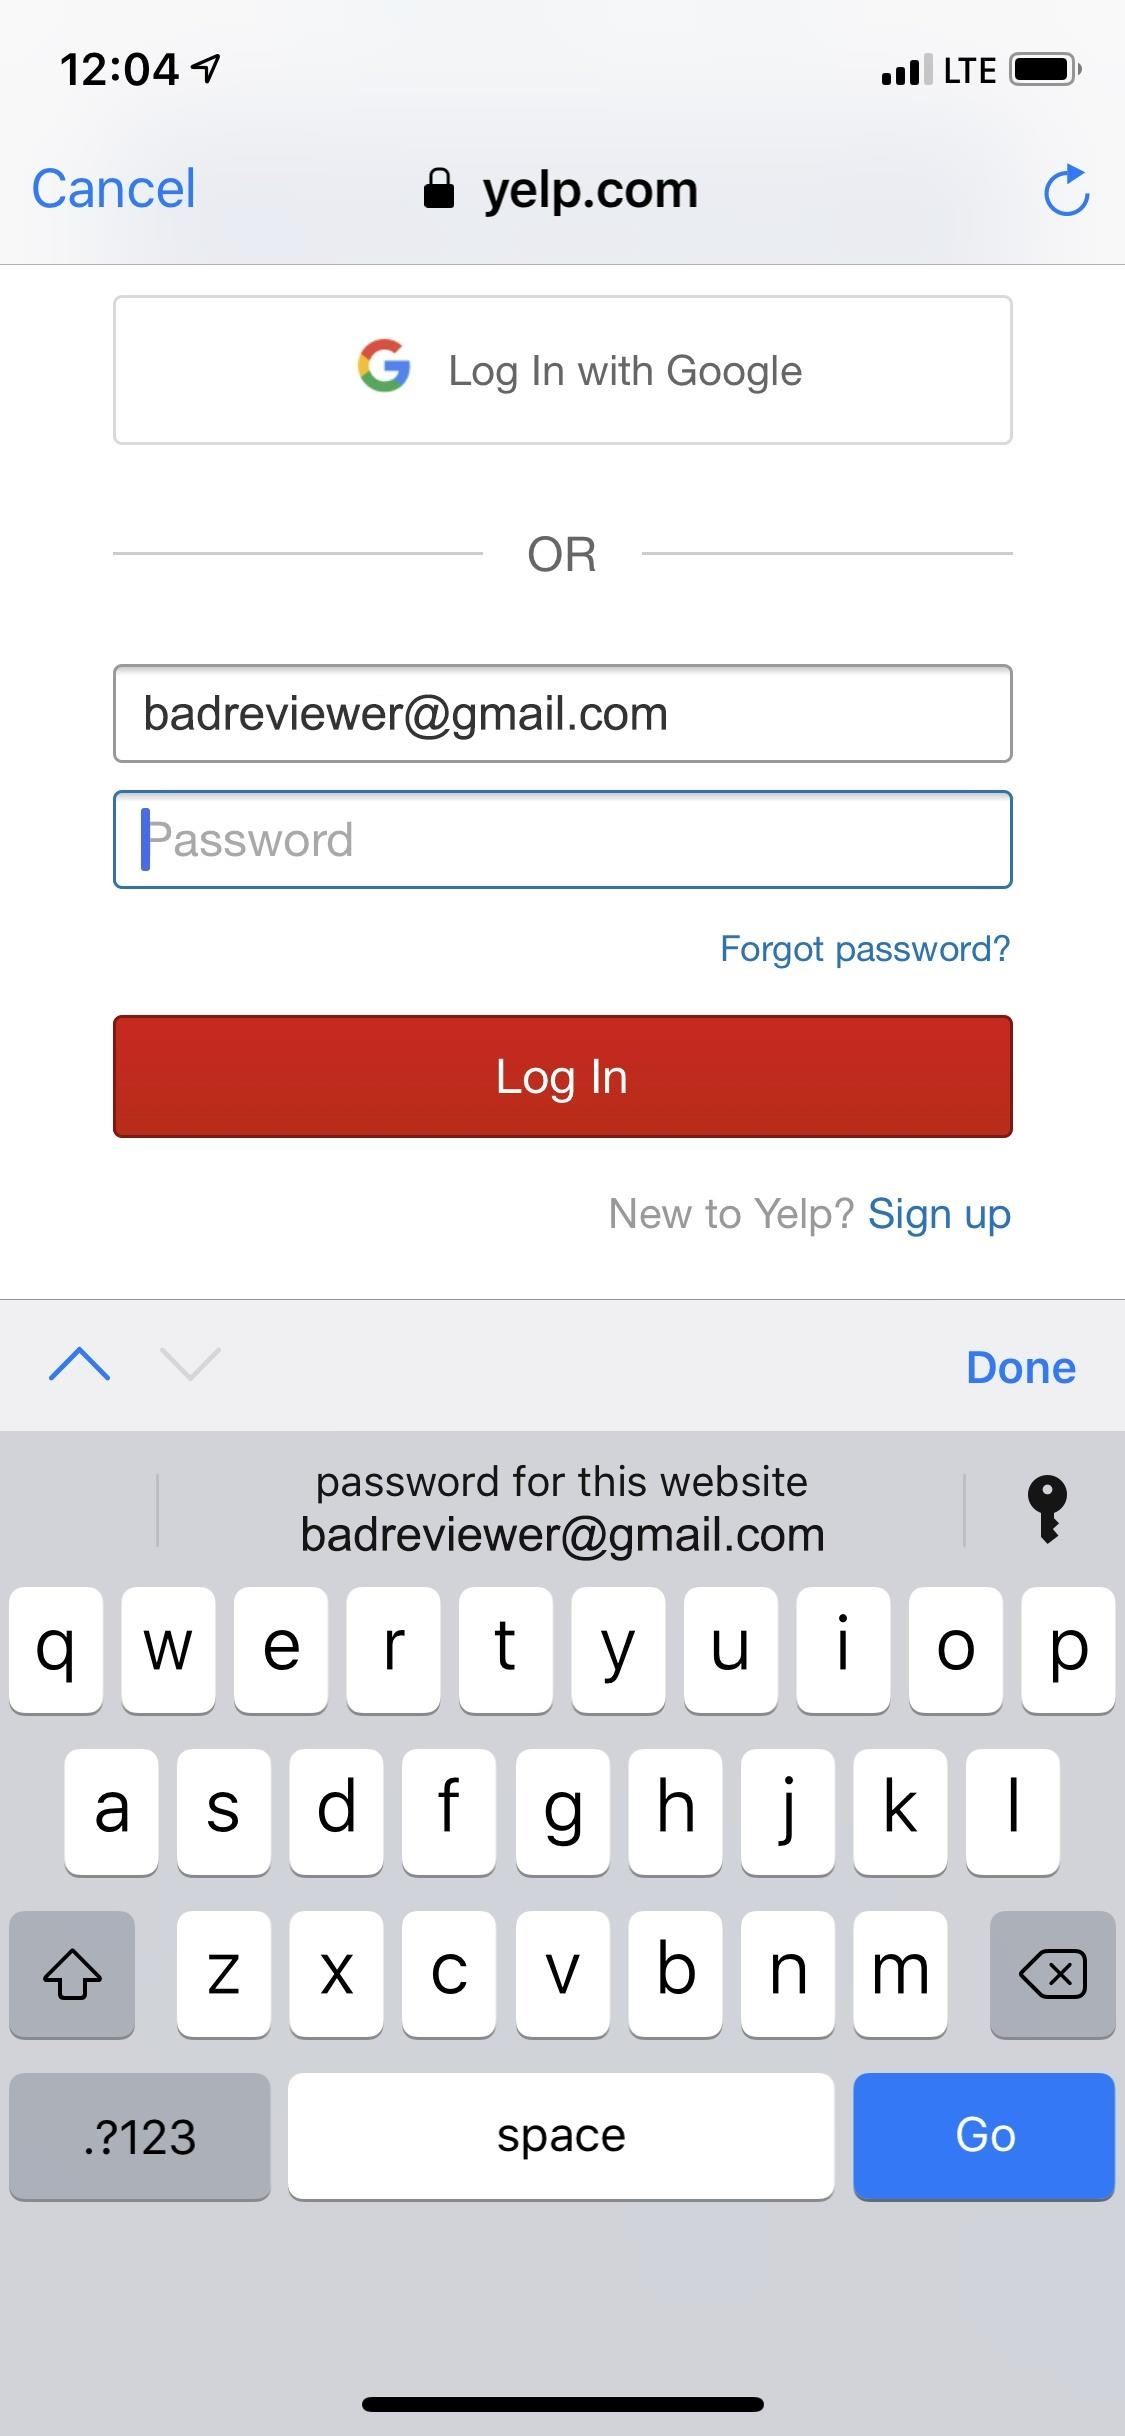 How to Find & Change Weak Reused Passwords to Stronger Ones More Easily in iOS 12